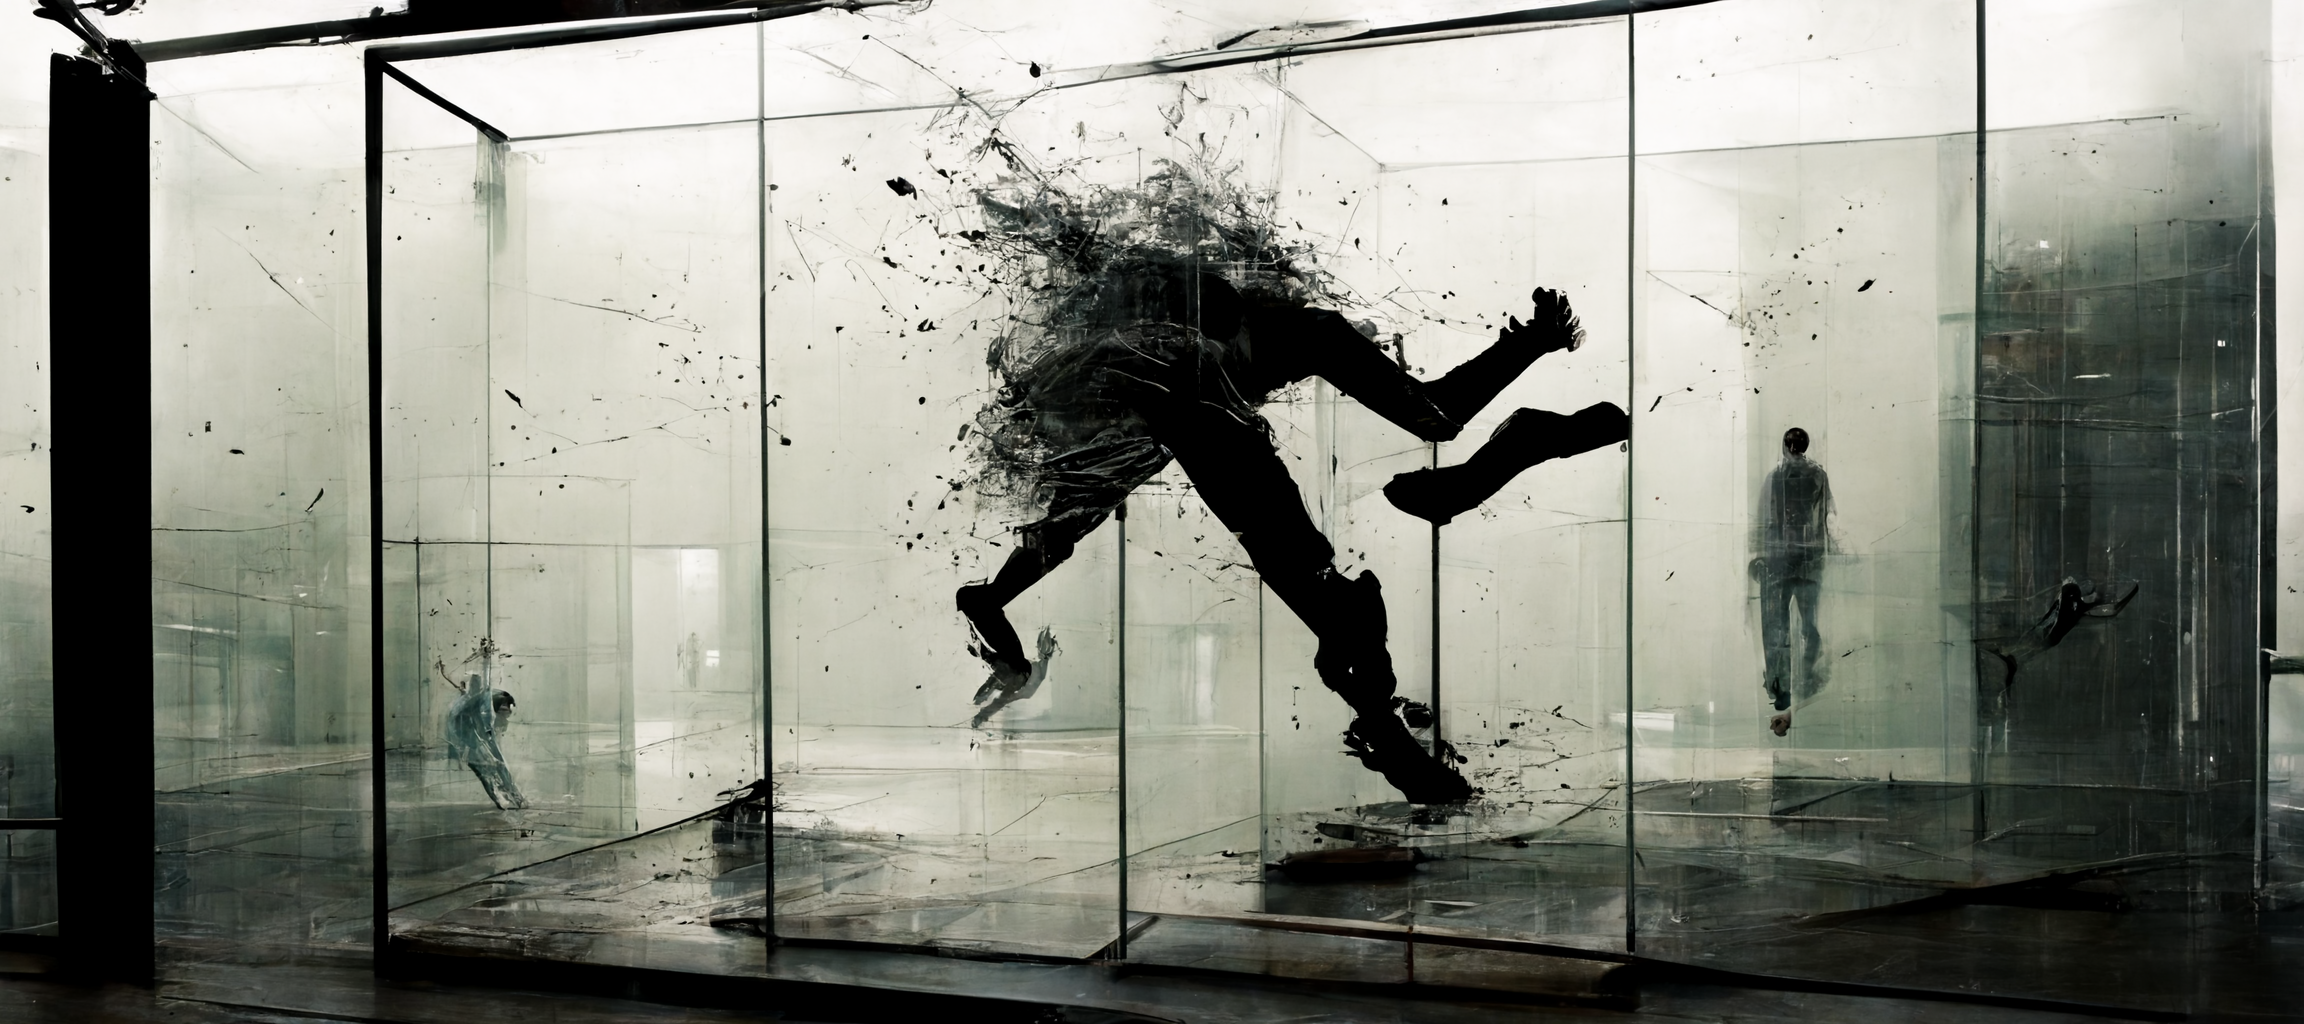 An AI image of a person made of glass breaking